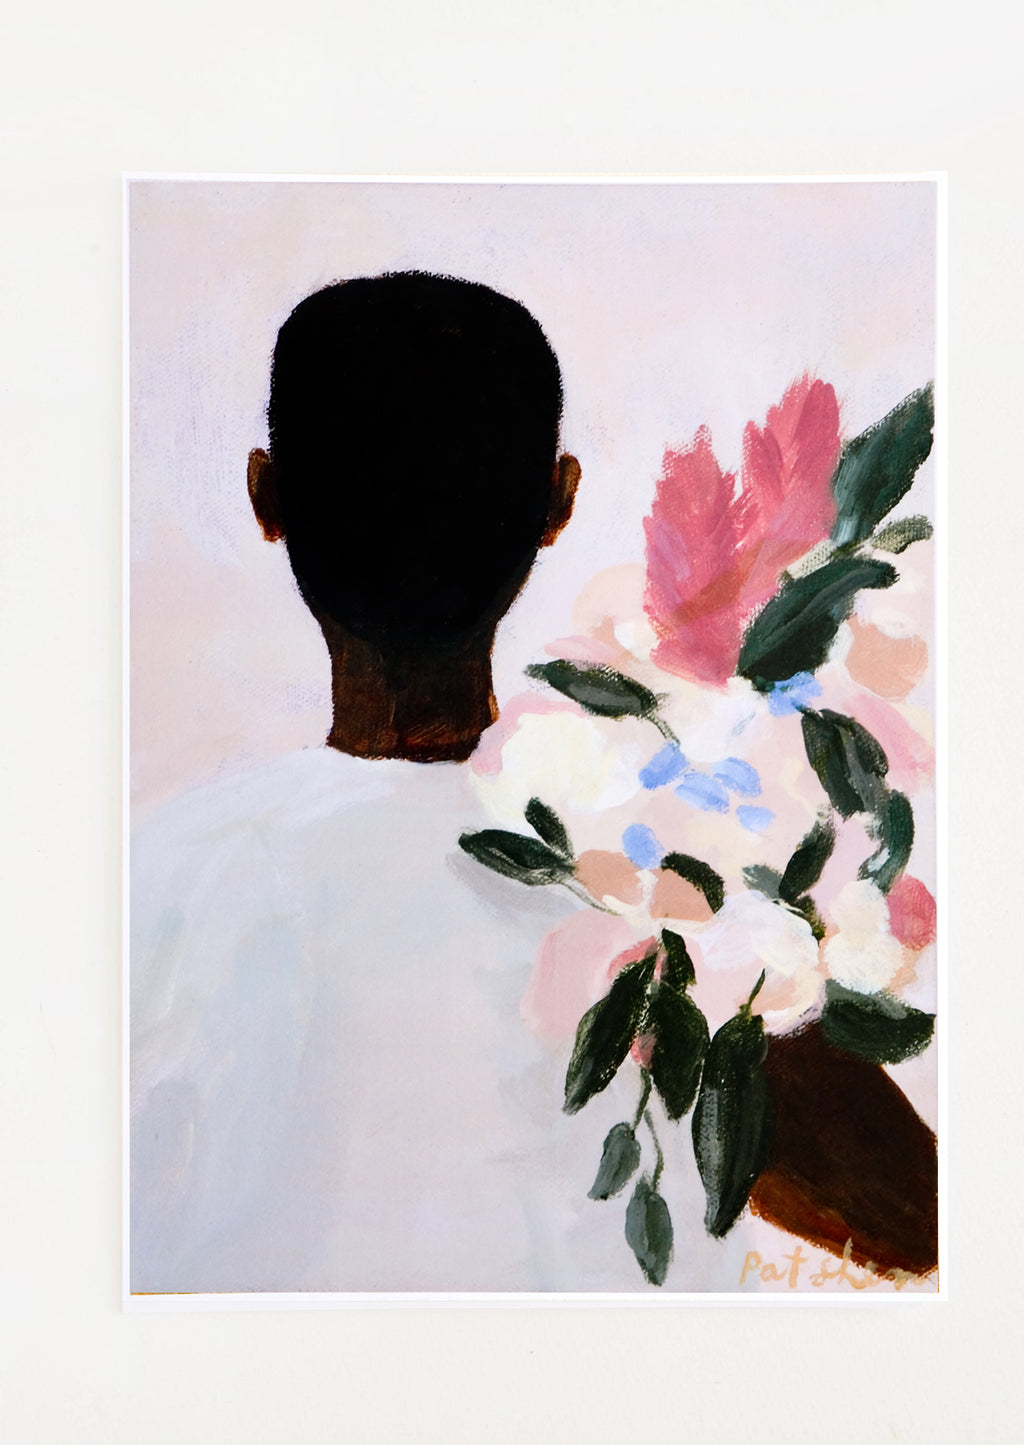 1: Art print featuring a Black man viewed from behind, holding a bouquet of flowers